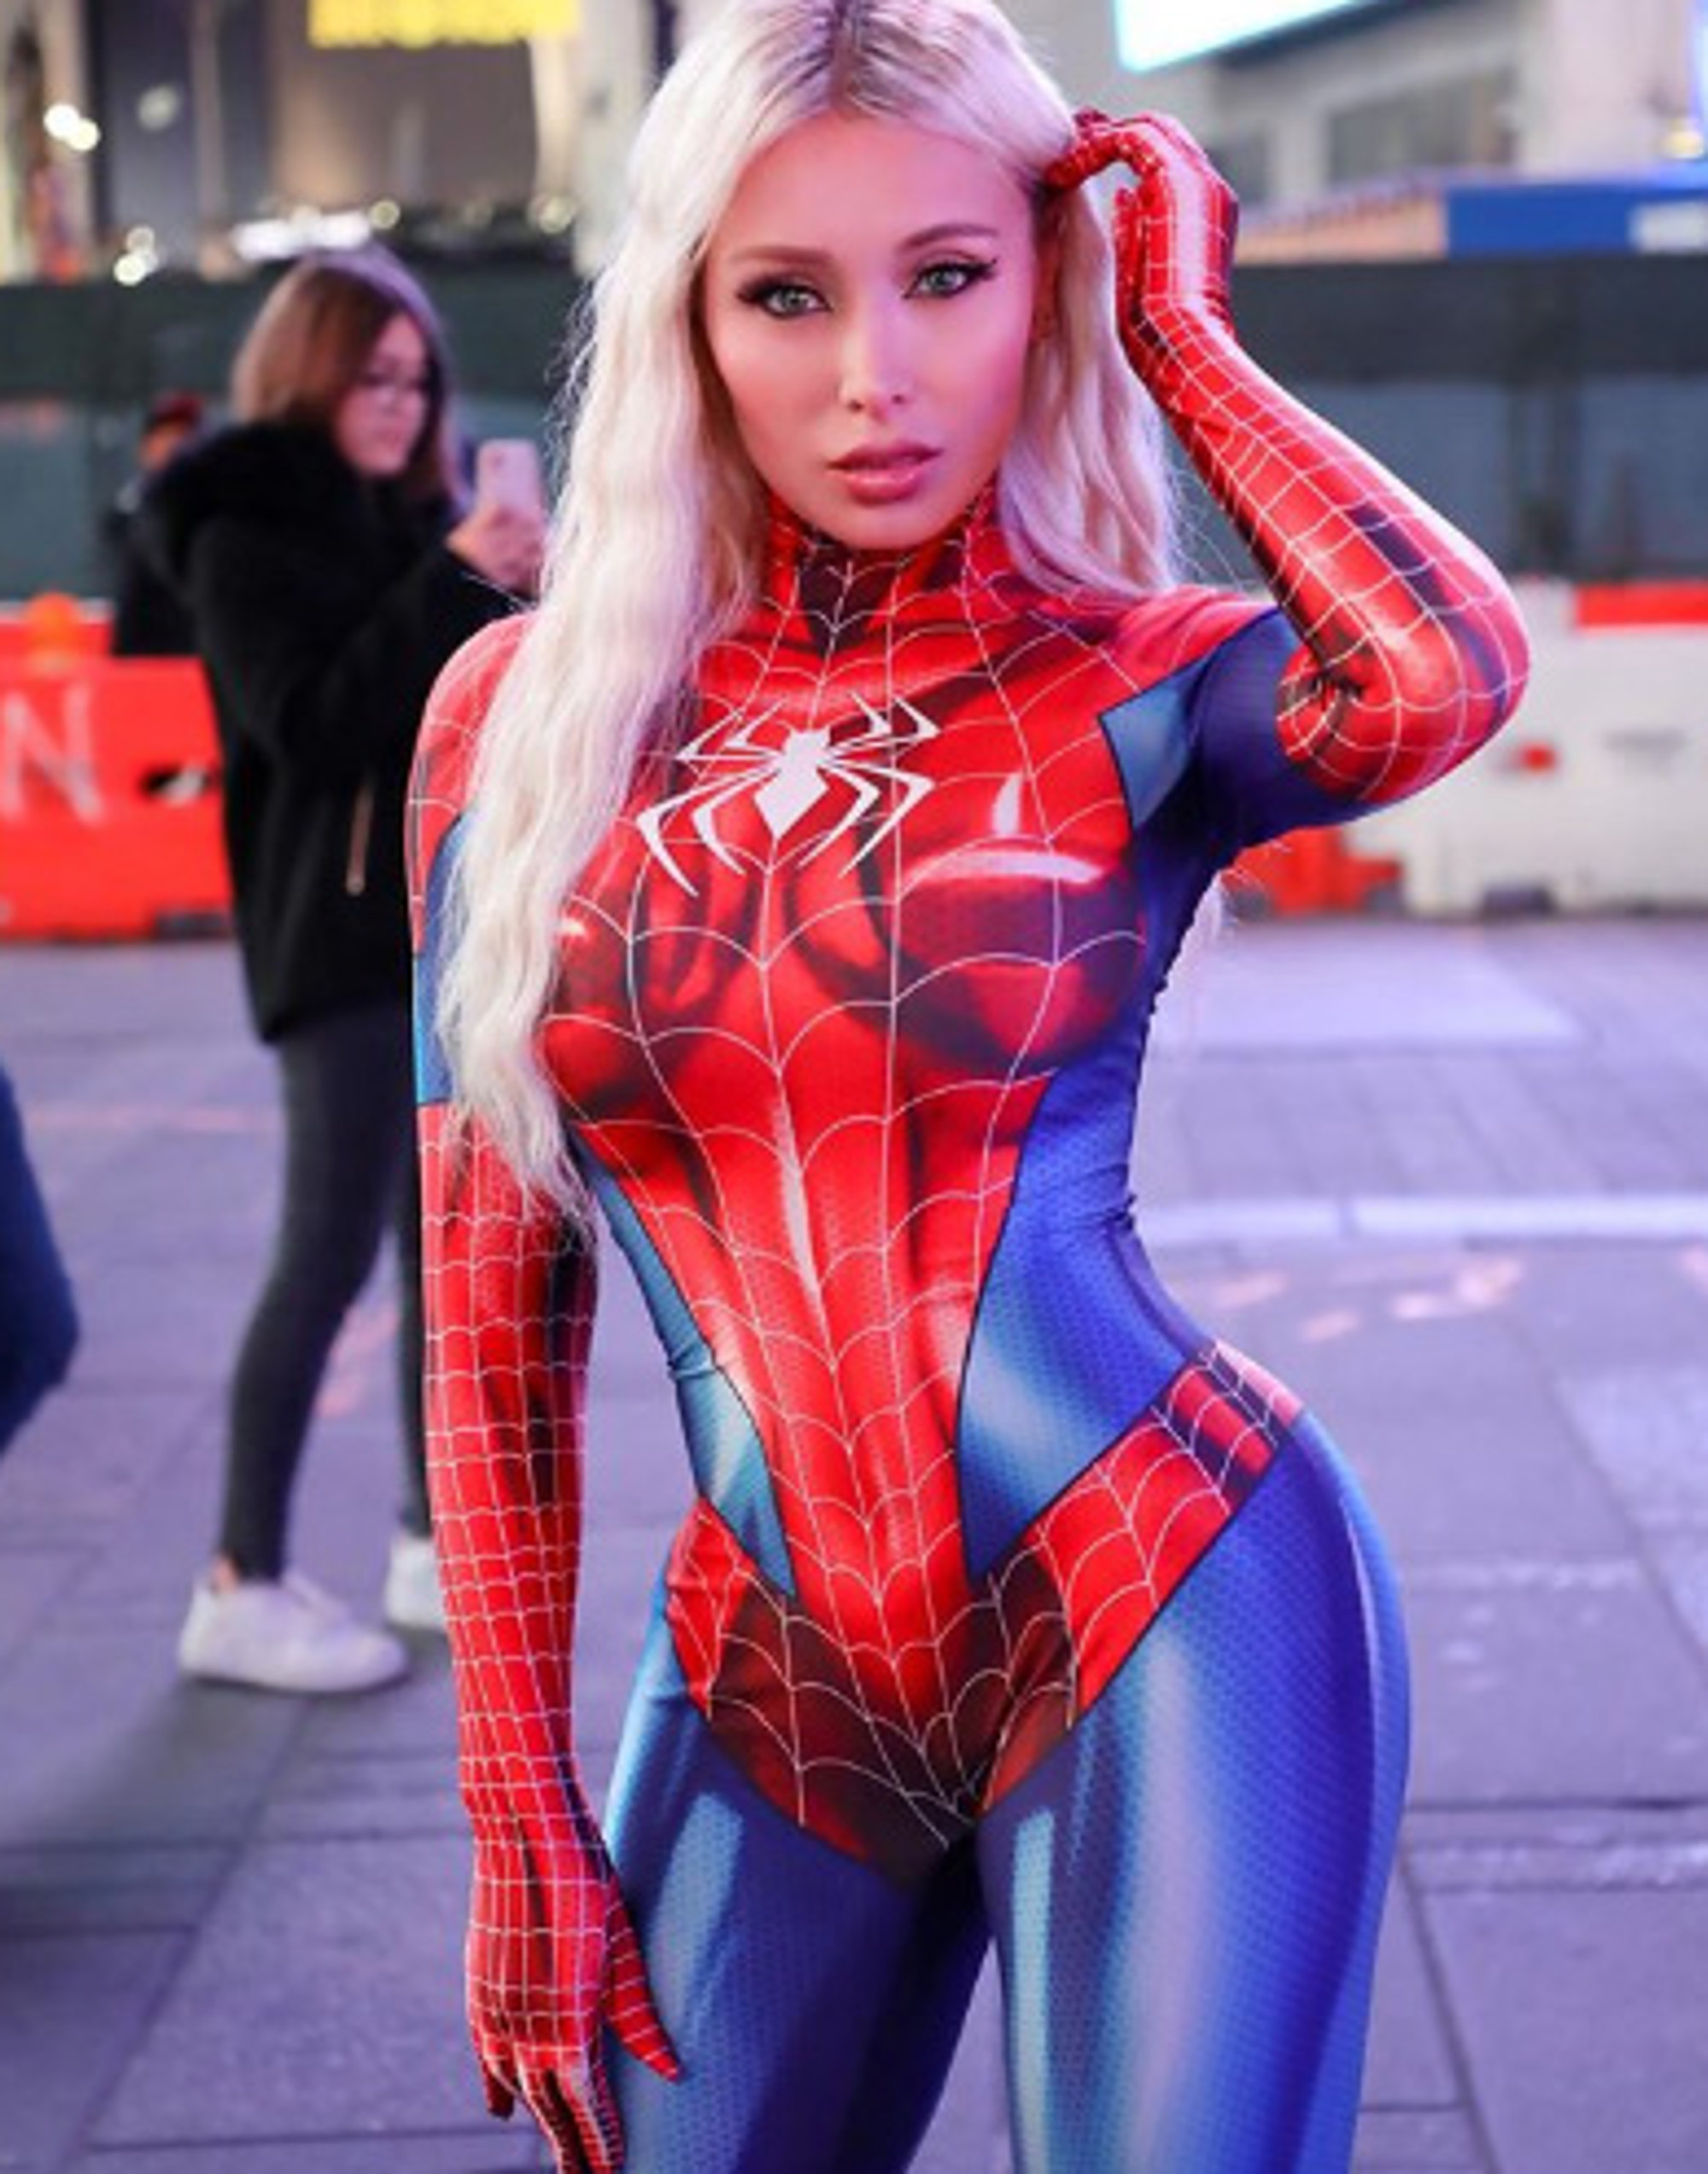 Read more about the article Playboy Star Chavez Stuns As Spider-Woman In NYC